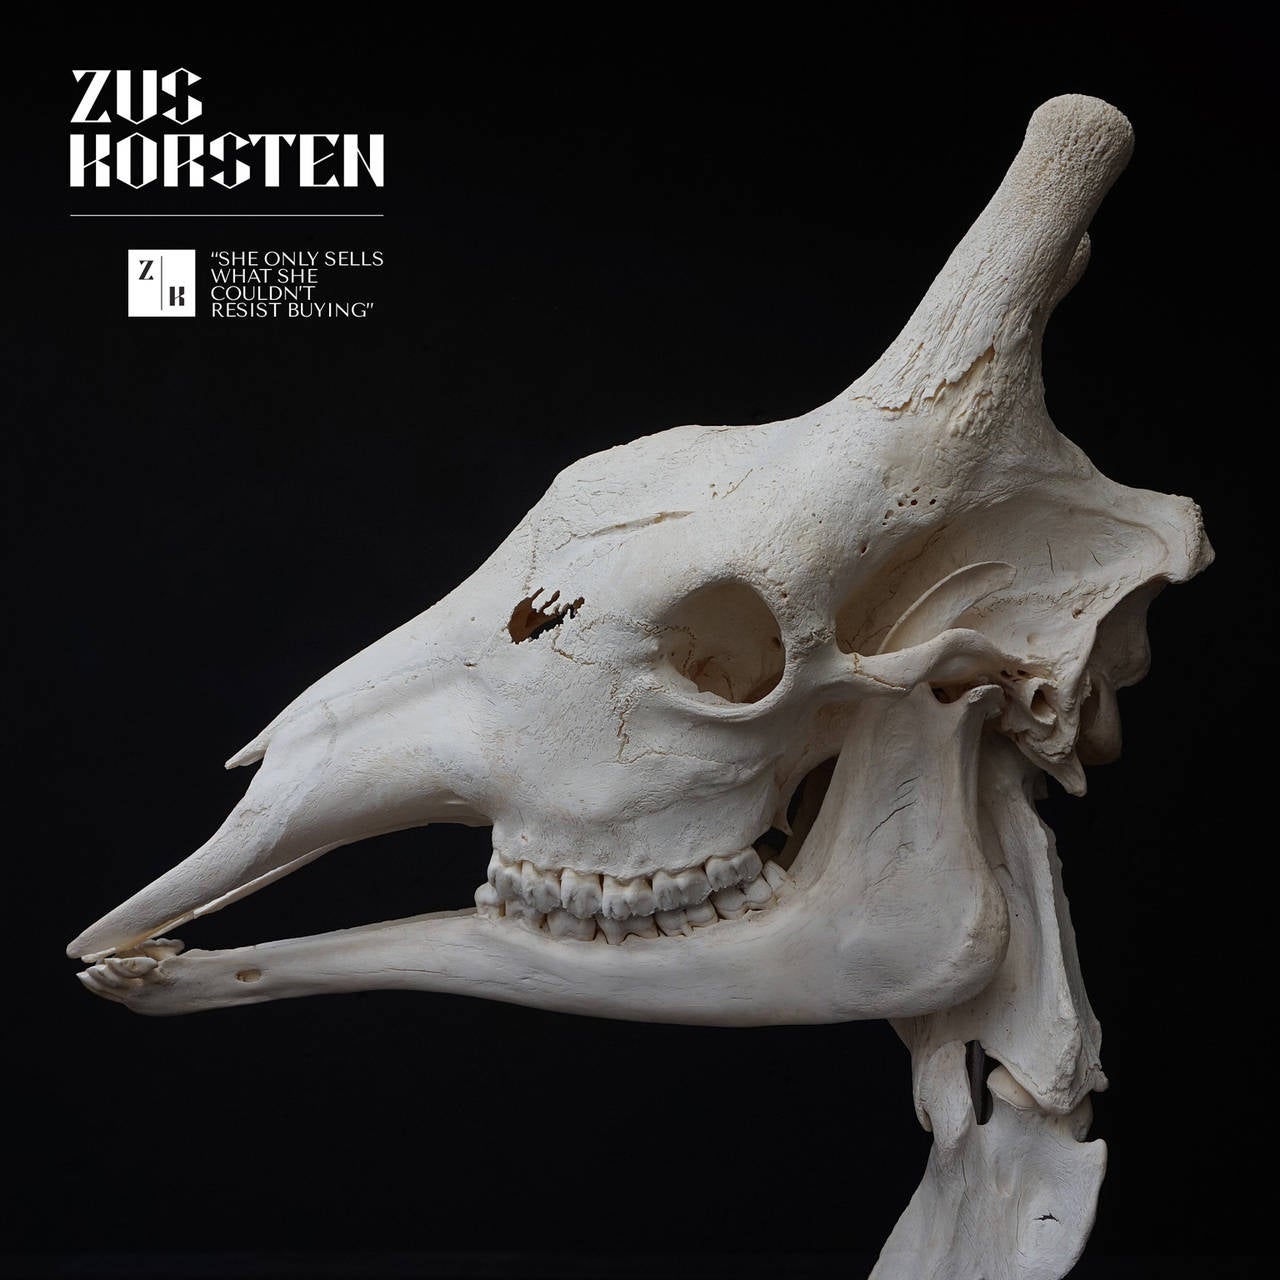 European Giraffe Skeleton Taxidermy Head and Neck on Solid Marble Base